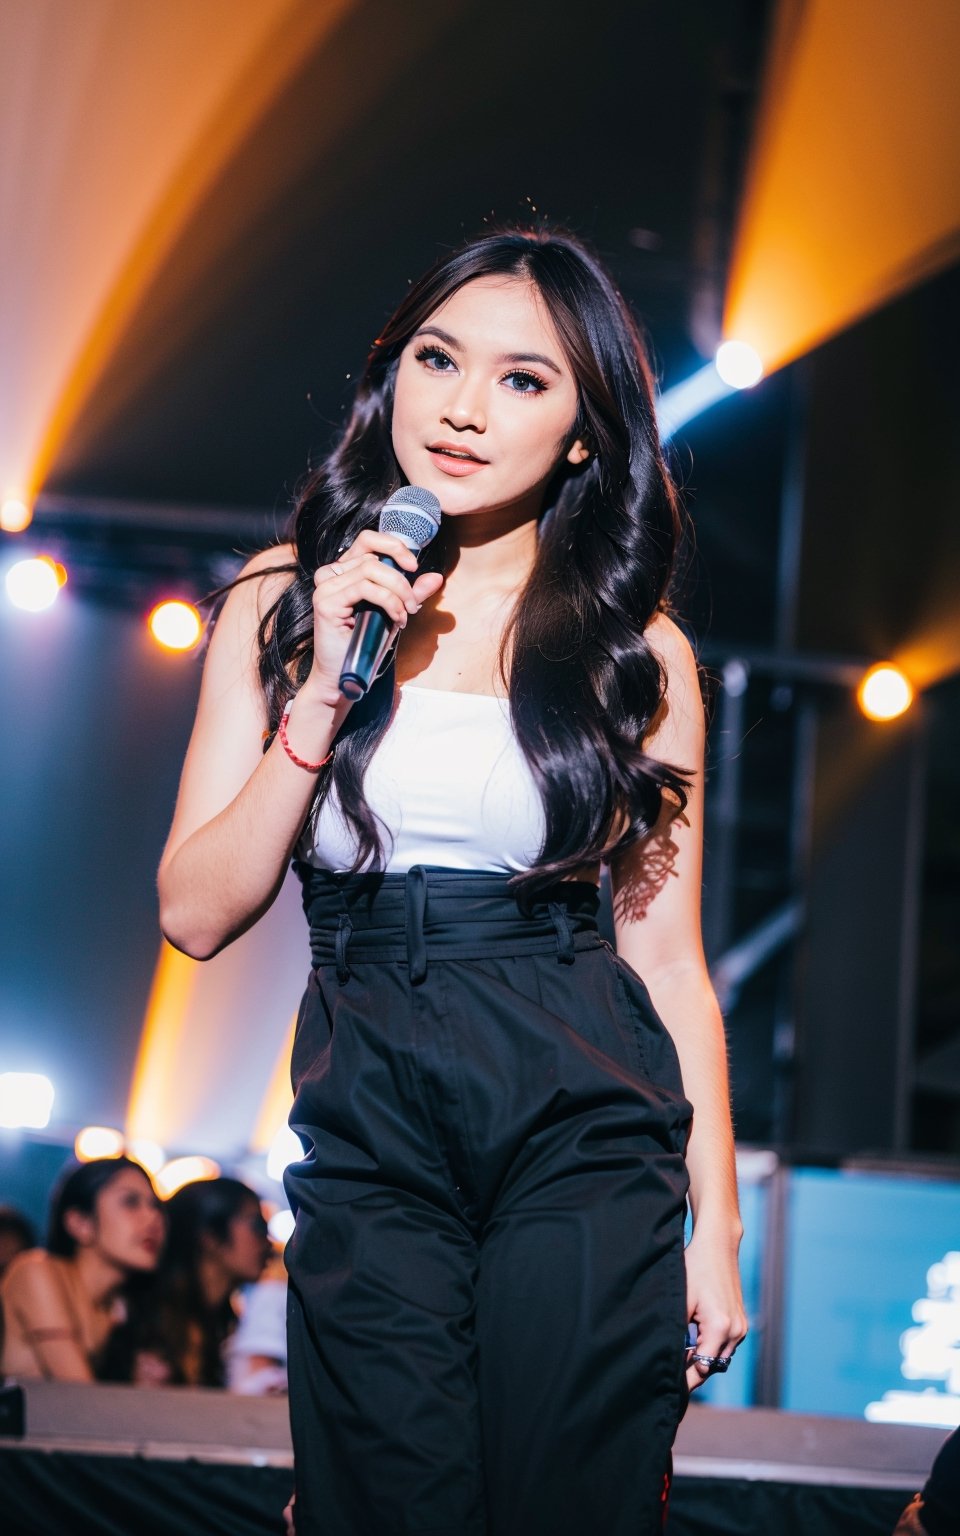 1 indonesian 20 yo girl,  long hair,  two tone hair, black and brown hair,  happy expression,  upper body,  (kpop idol, kpop idol clothing, singing, dancing),  (huge concert stage background, stage lighting),  oily skin,Indonesiadoll, jawline, model face, (facing_viewer), body facing front , standing, detailed face, amazingly beautiful , holding mic, 1girl, idol, singing in front of a crowd, concert, neon lights, dance, happy pose